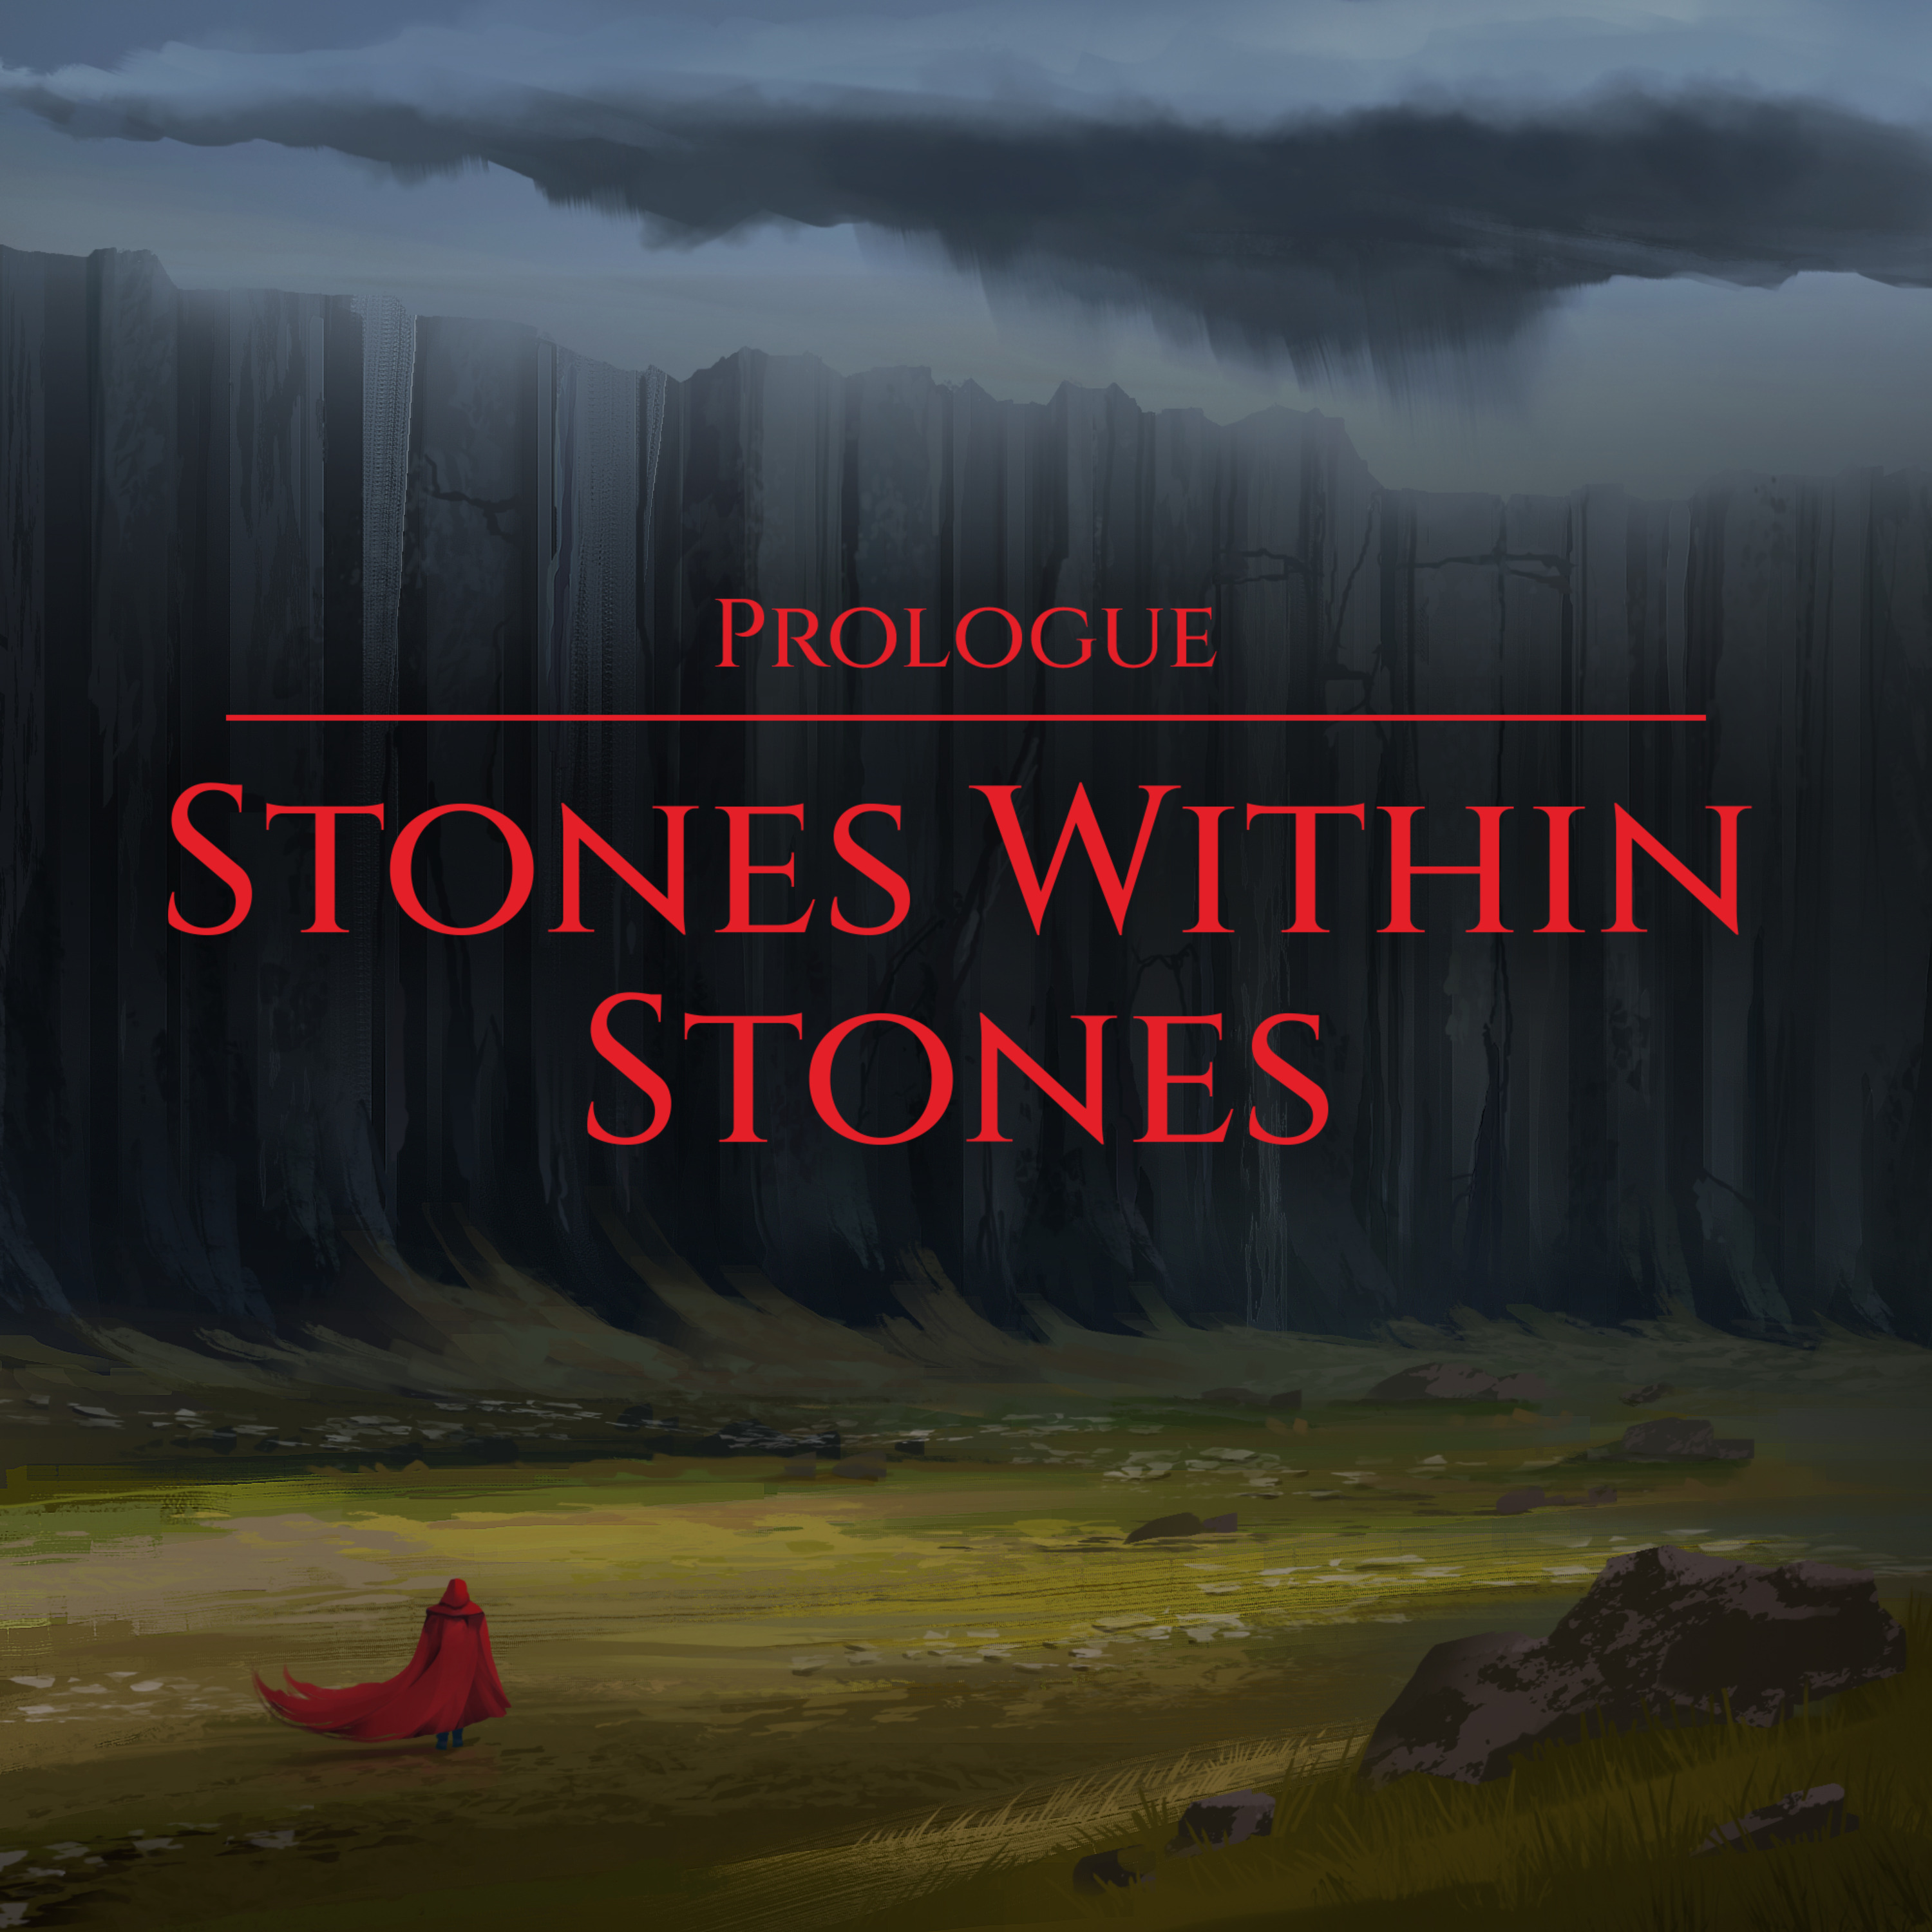 Book 1 | Prologue | Stones Within Stones